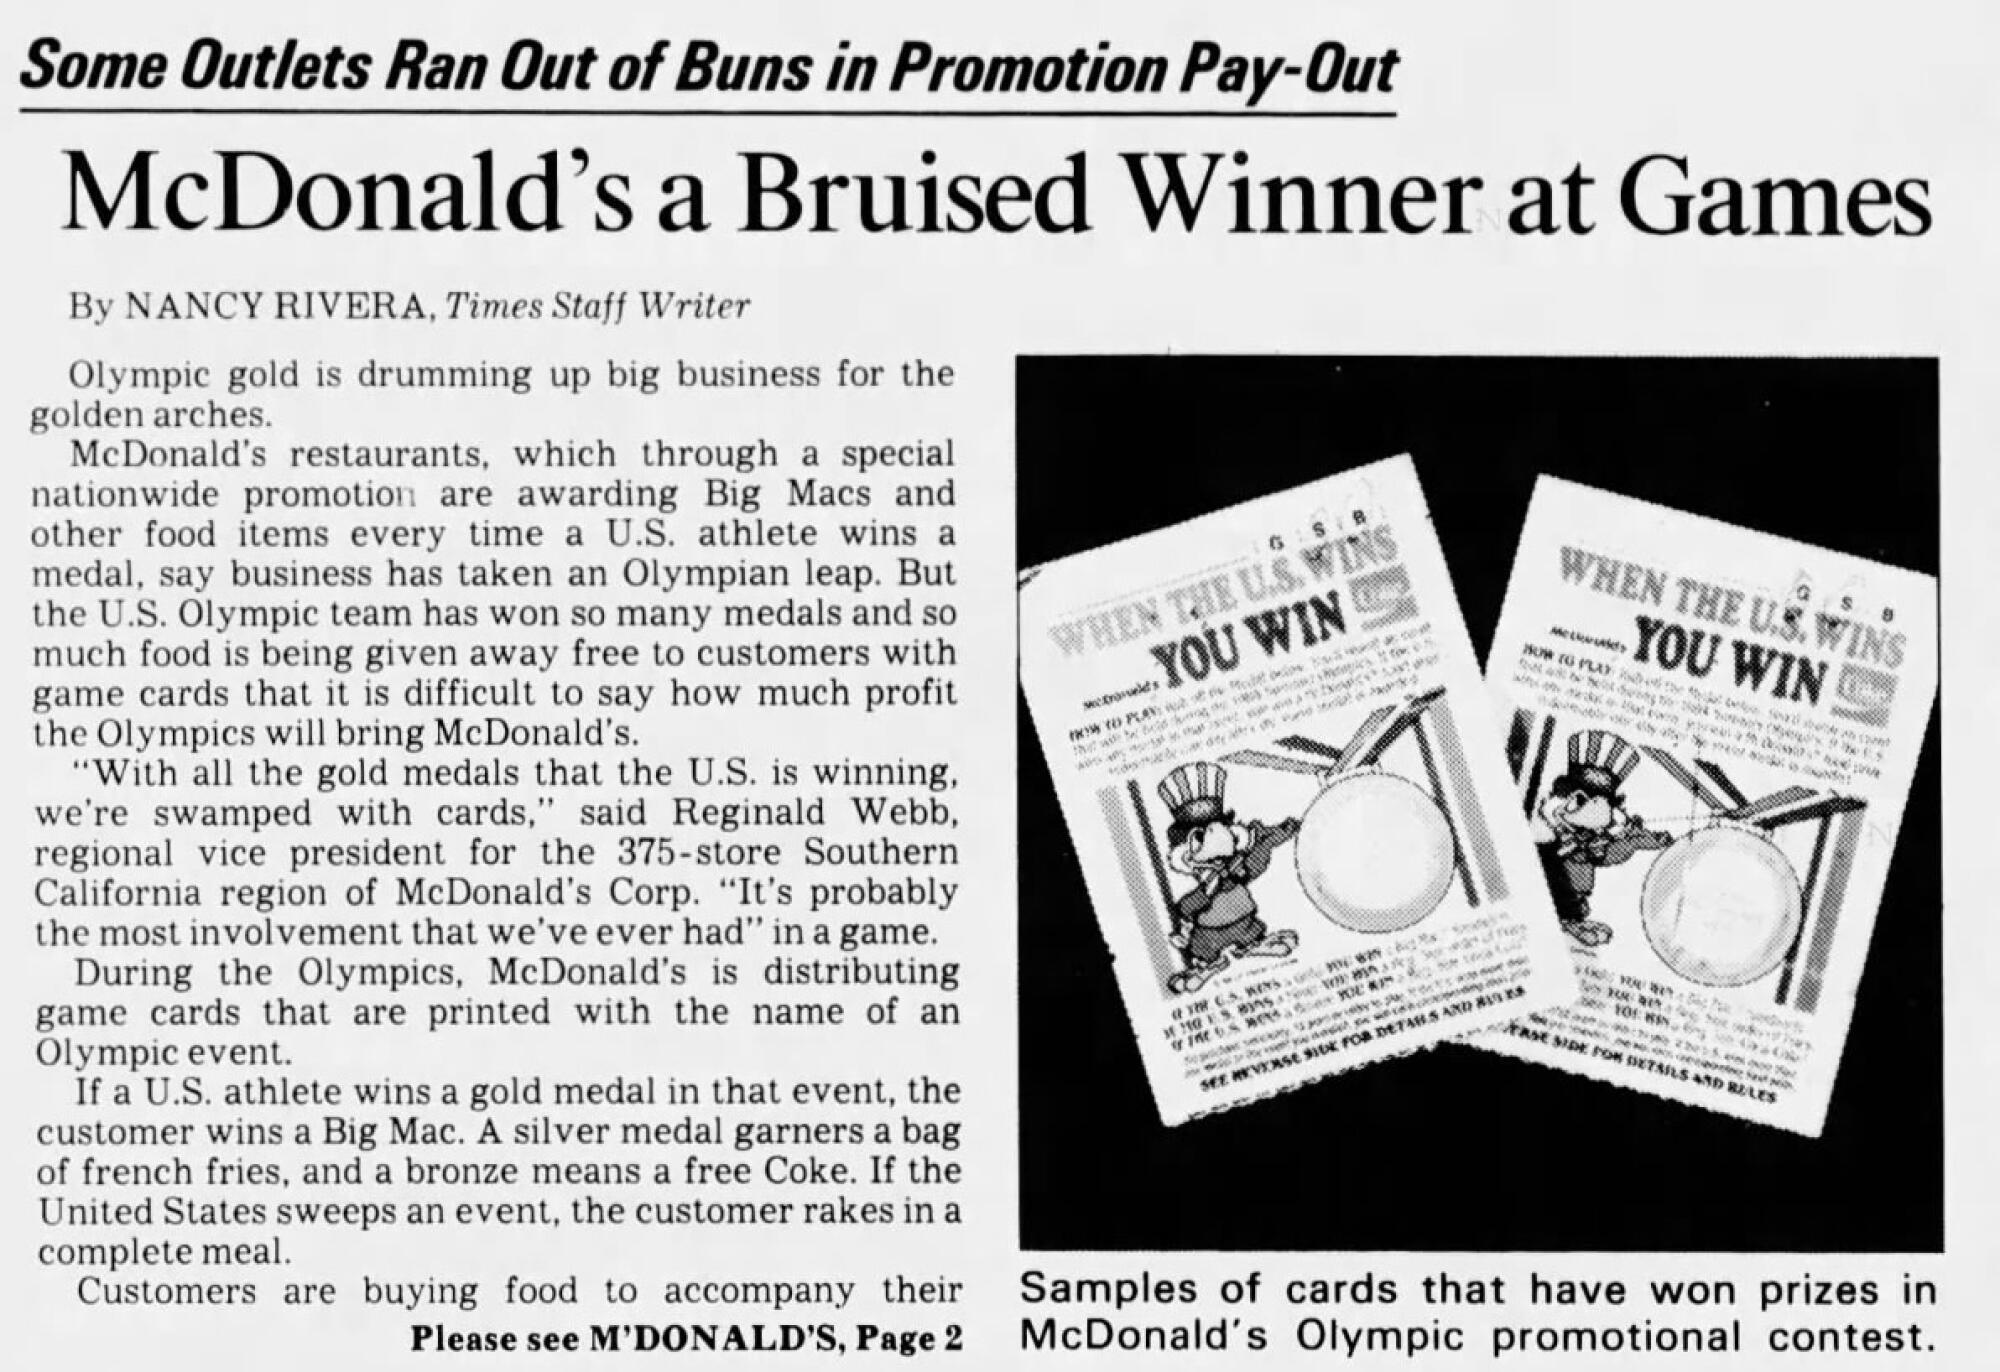 Headline: Some outlets ran out of buns in promotion pay-out. McDonald's a bruised winner at Games